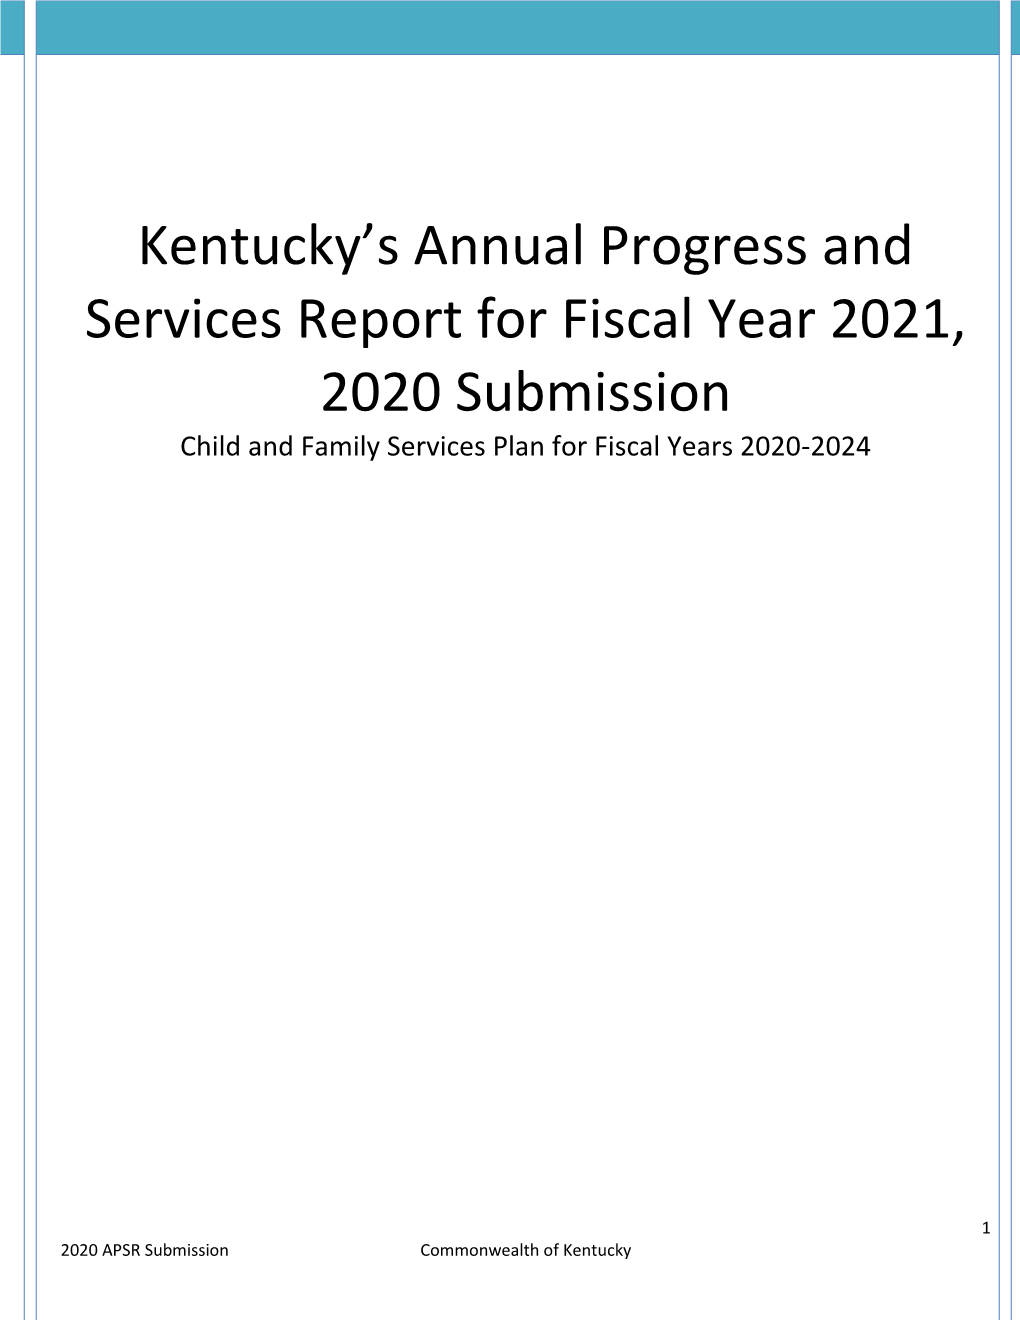 Kentucky's Annual Progress and Services Report for Fiscal Year 2021, 2020 Submission